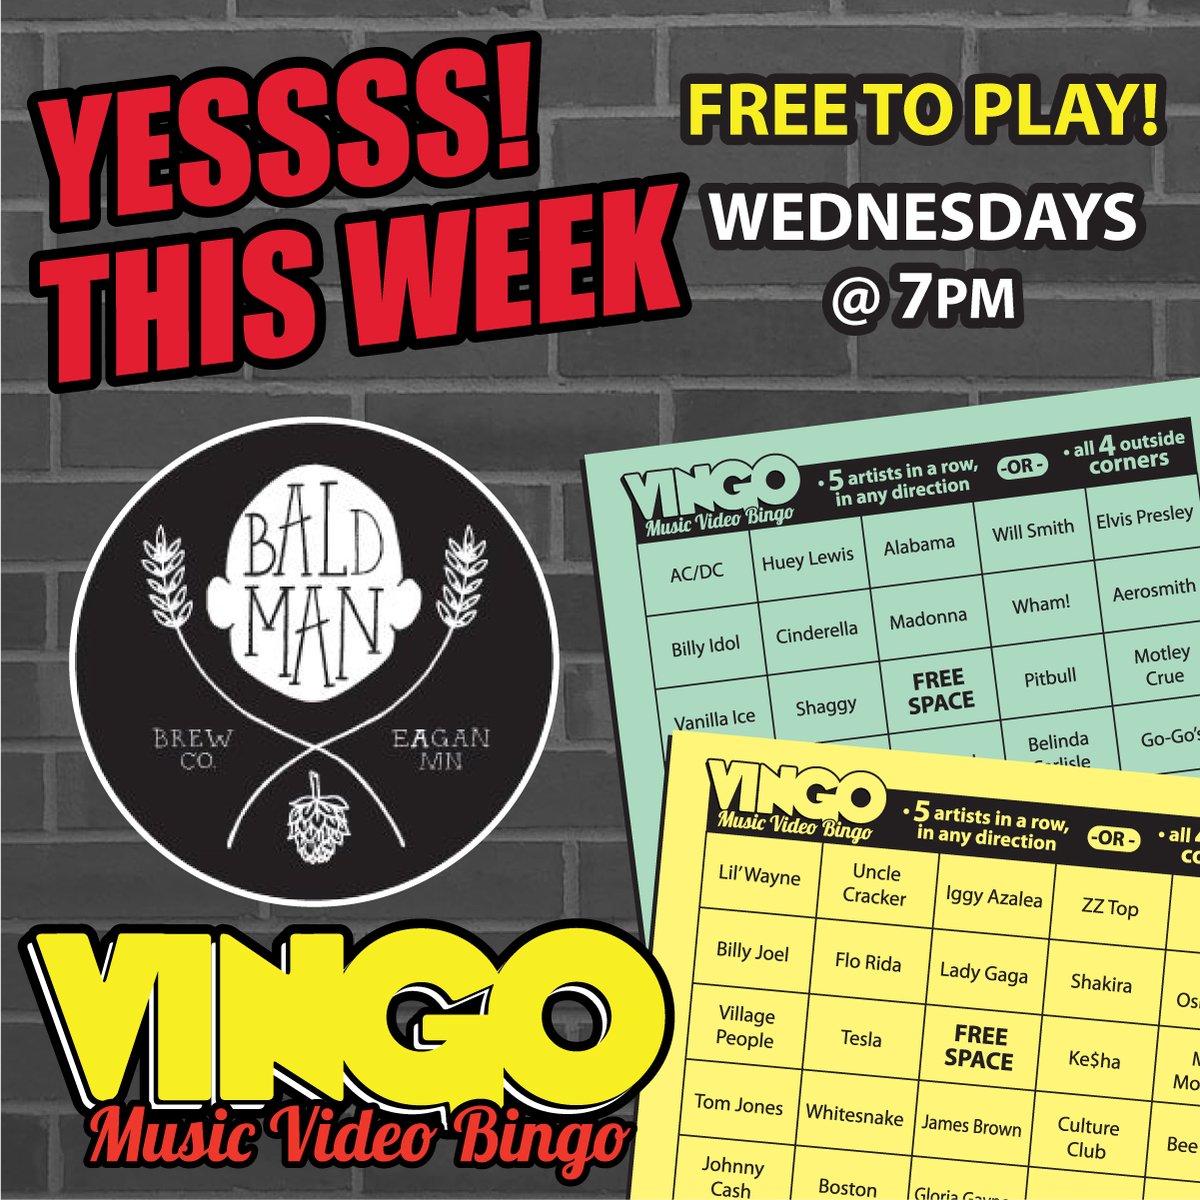 We play the clips, you watch and listen. Watch the VIDEO, listen to the music and play along. you mark off your board. If u Get 5 in a row or 4 outside corners you win a prize! 9+ prizes given out each week. -Every Wednesday @ 7pm (except for 3/6/24) -Absolutely FREE to play